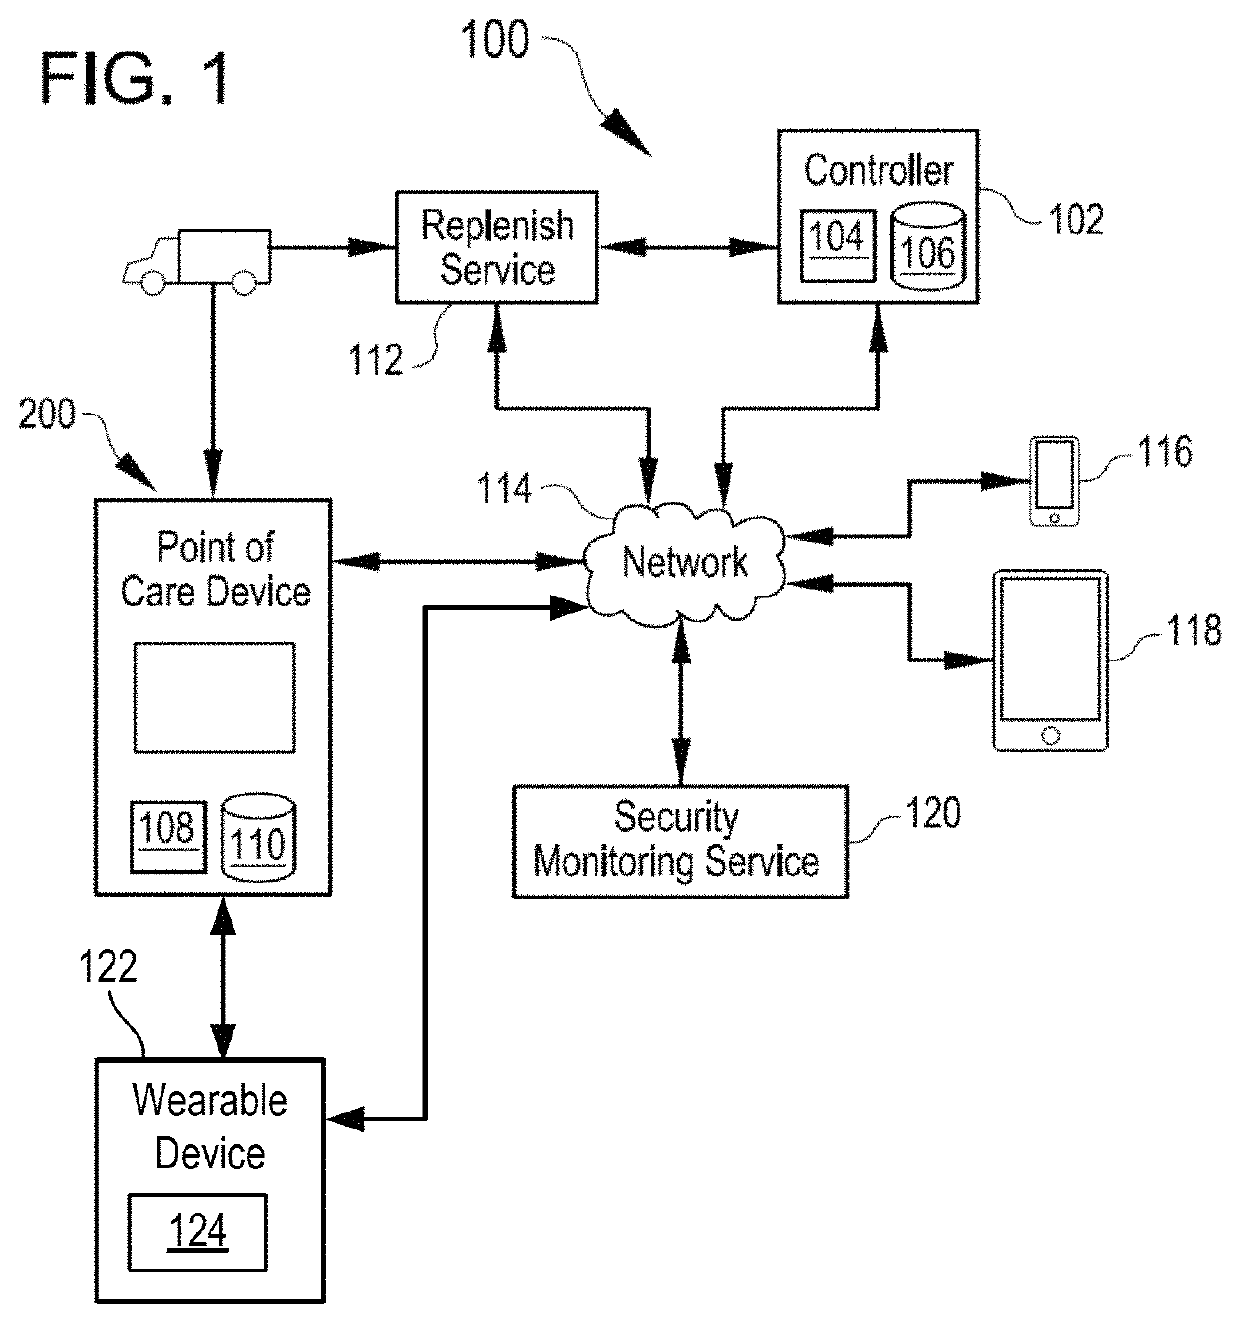 Automated and secure methods for dispensing medication